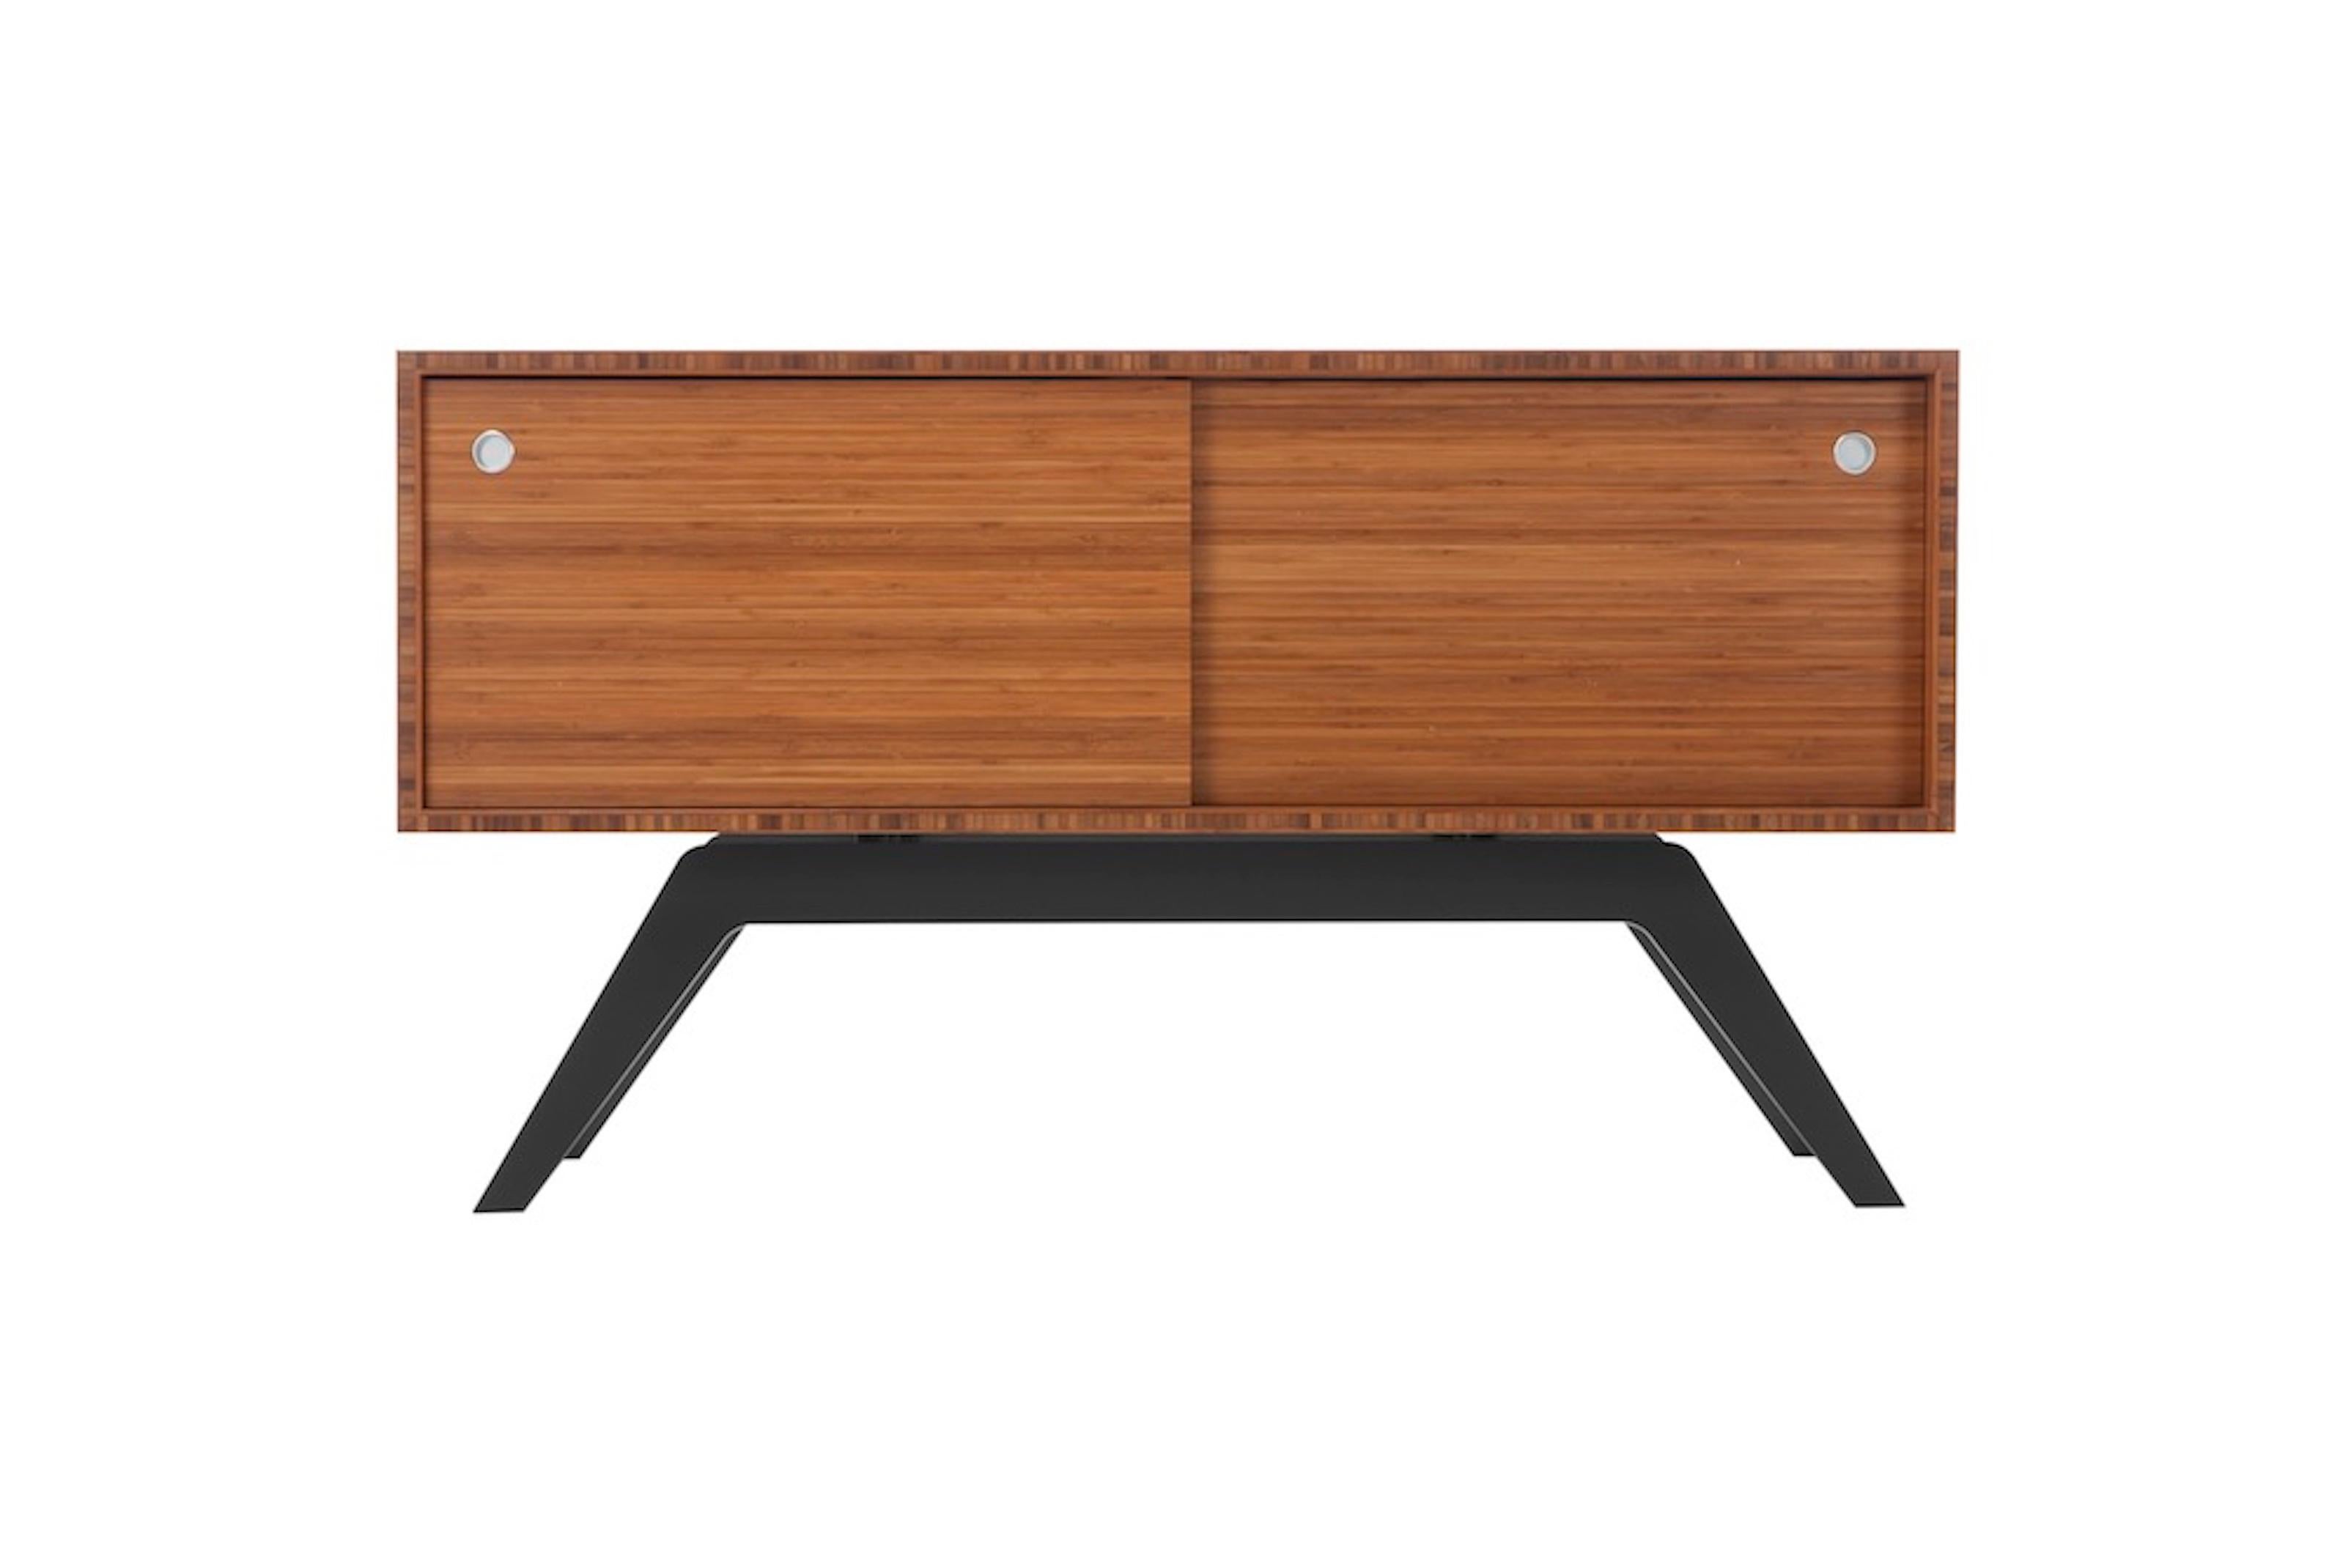 While designed for a more compact space, the Elko Credenza Small delivers enough storage capacity for your media equipment, books, clothes, dishes or whatever else you’d like to conceal. Like it’s slightly larger predecessor, the Elko Credenza Small